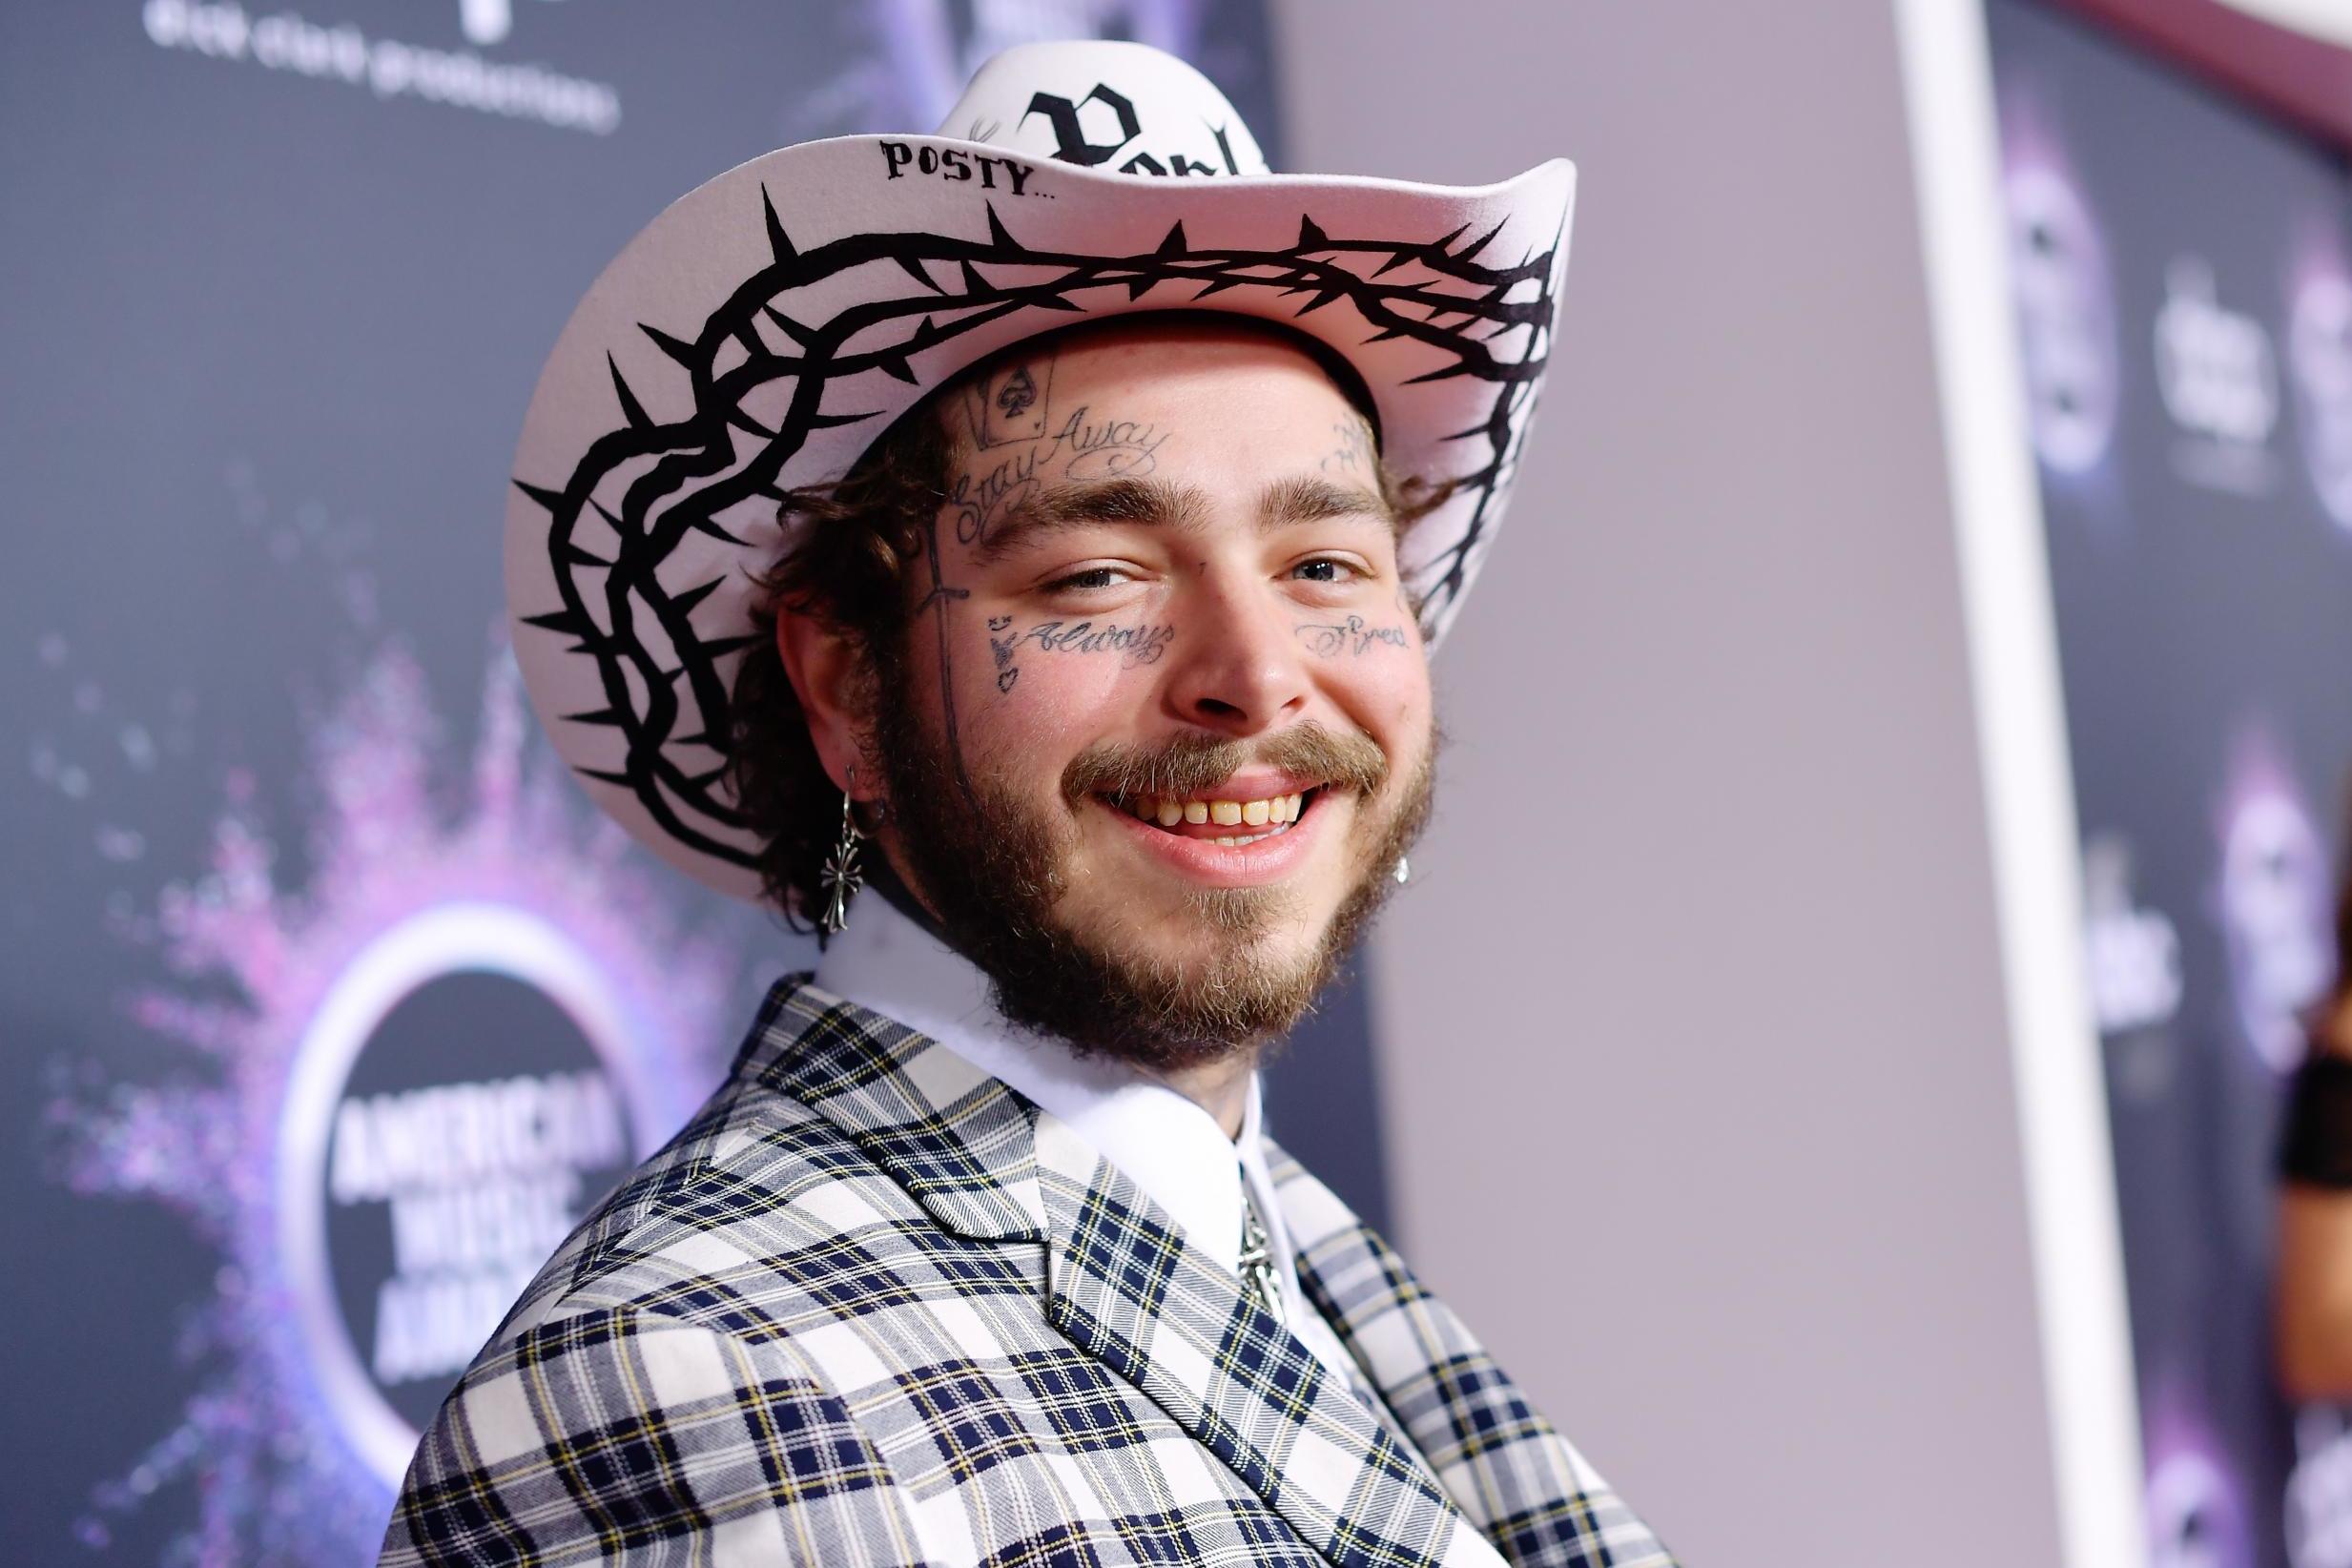 Post Malone at the American Music Awards on 24 November 2019 in Los Angeles.